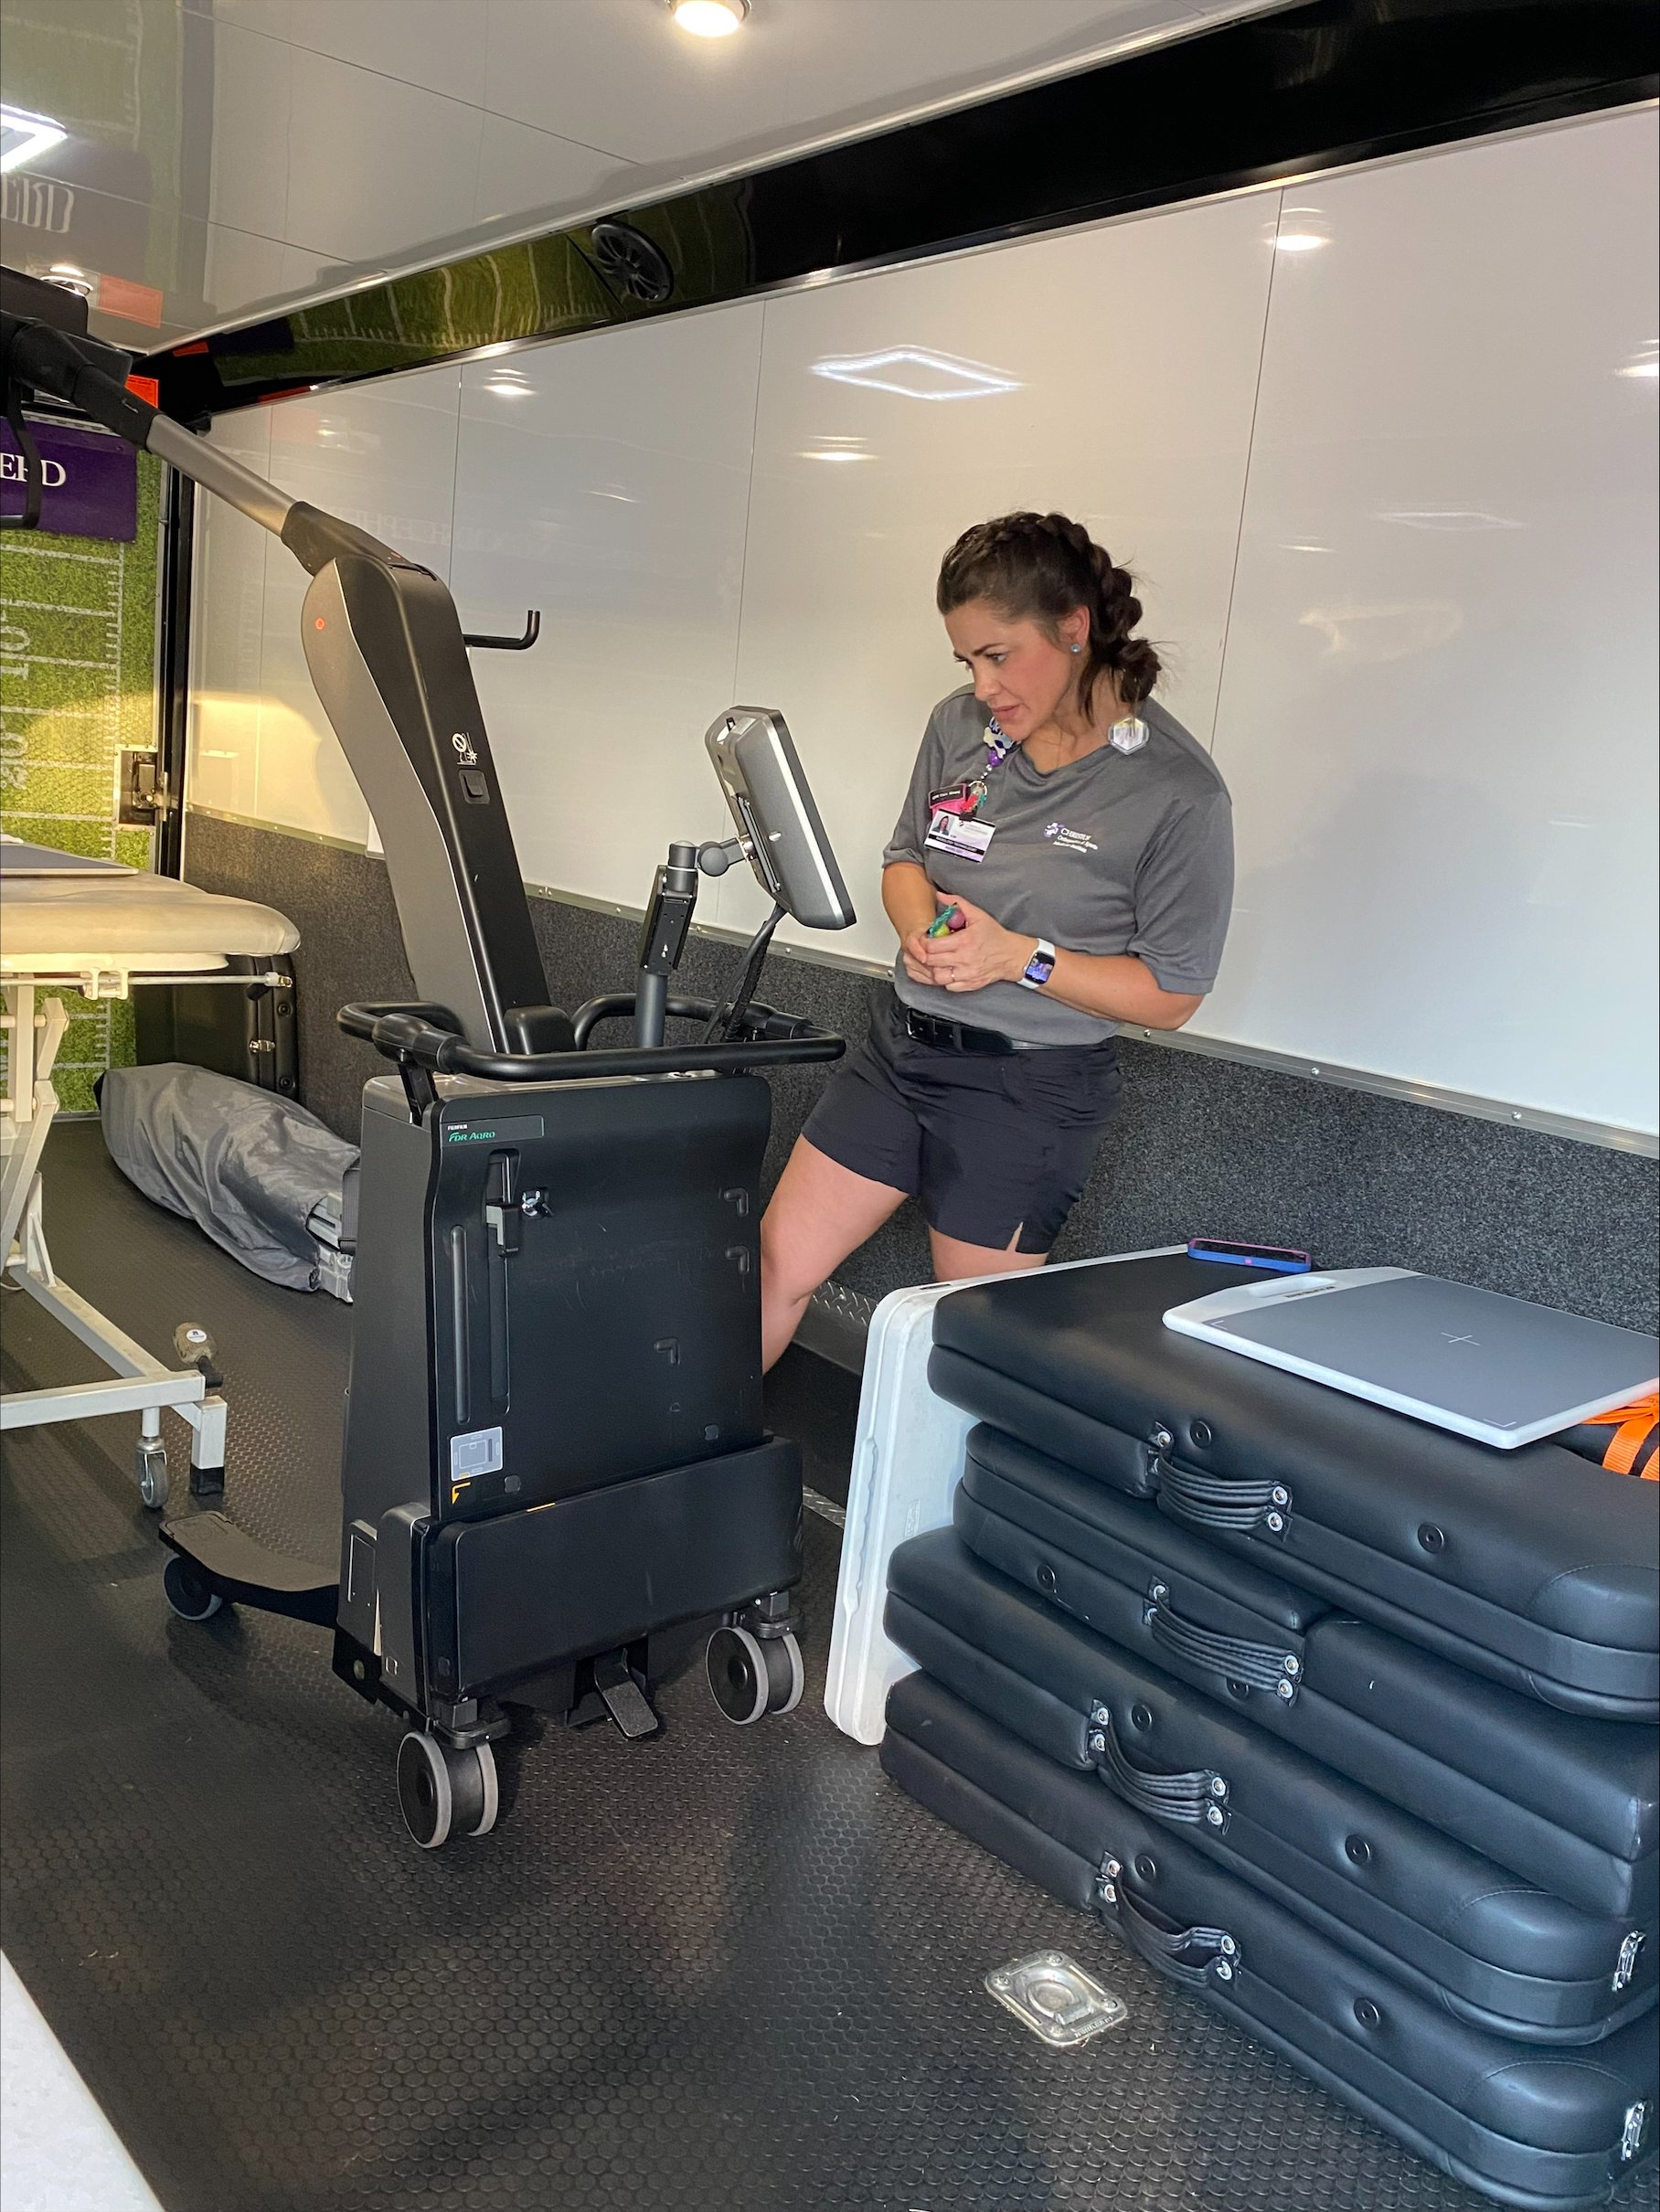 Each MATR is a fully stocked sports medicine clinic and is operated by the athletic trainers at CHRISTUS Orthopedics and Sports Medicine Institute